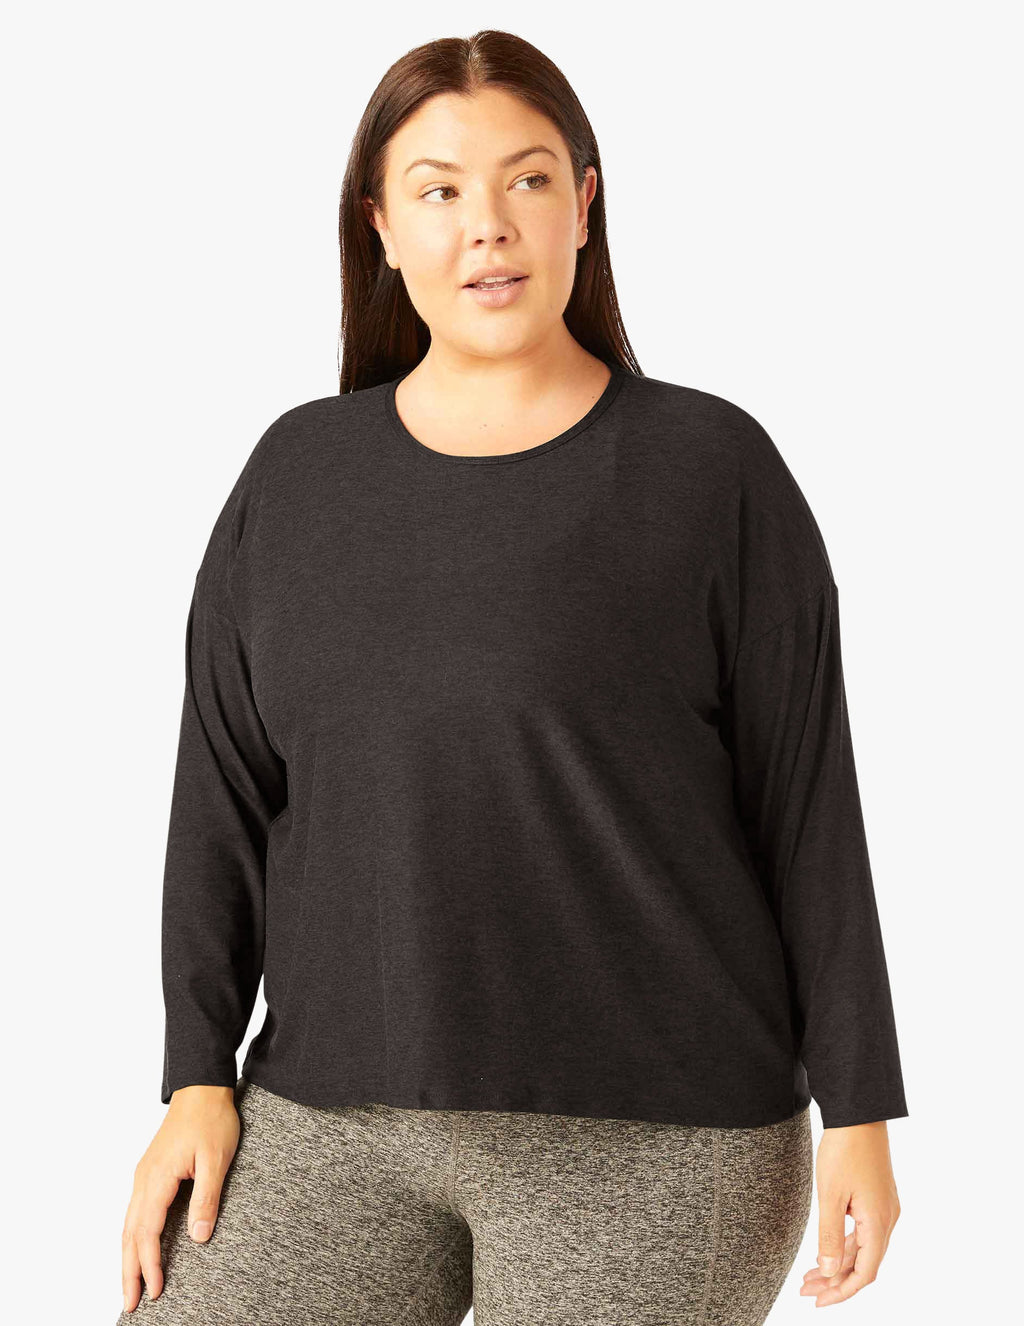 Featherweight Morning Light Pullover Featured Image